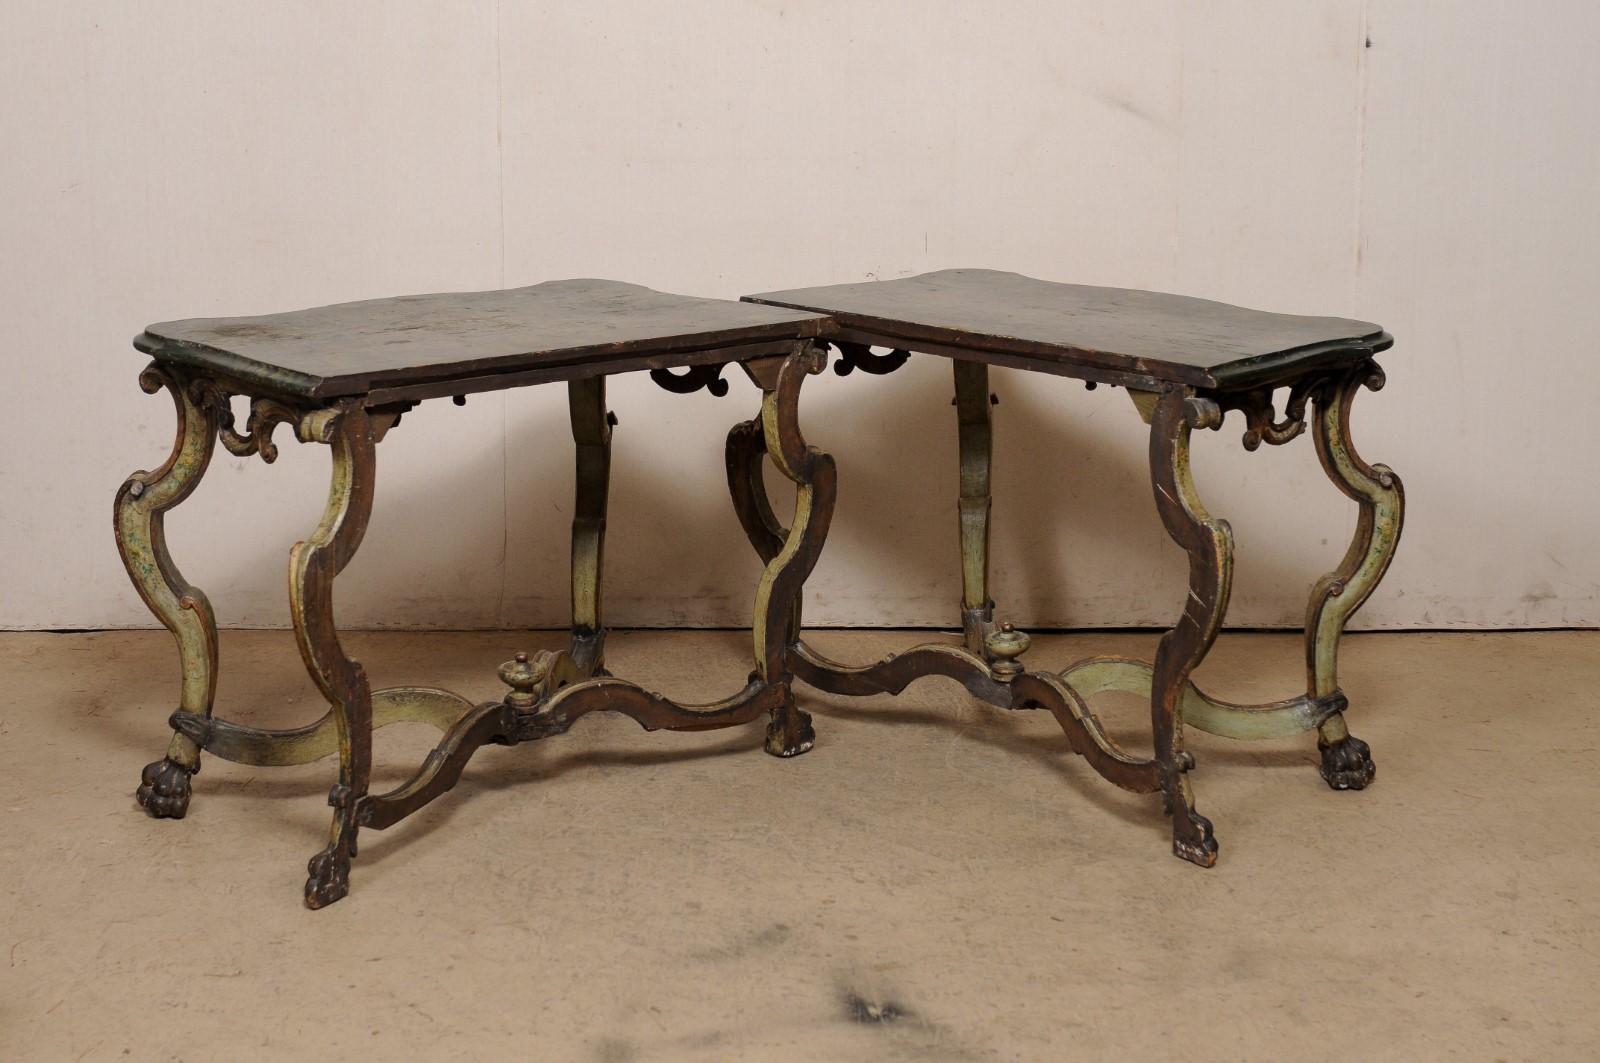 Exquisite Pair of 18th C. Italian Venetian Carved & Painted Wood Console Tables For Sale 5